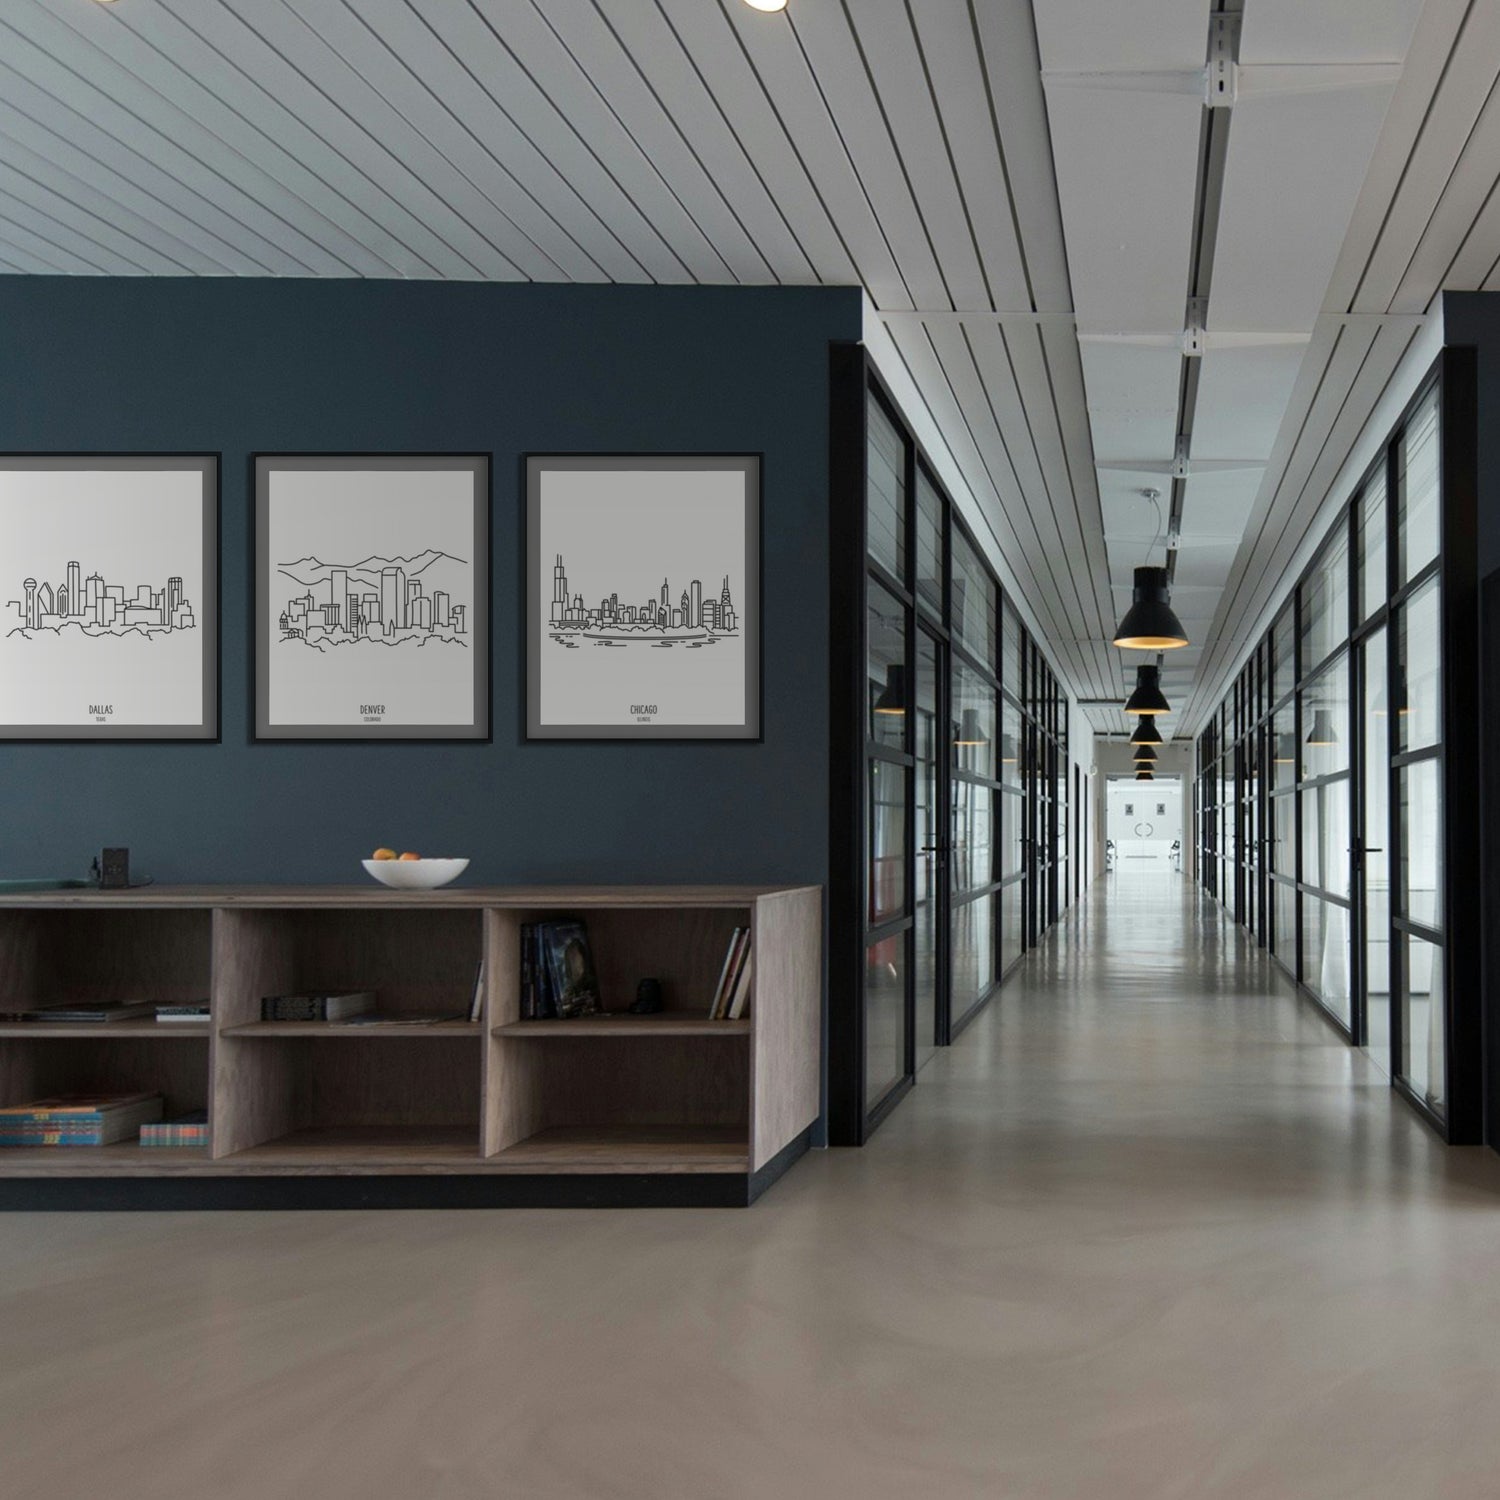 A group of three framed drawings in a modern office